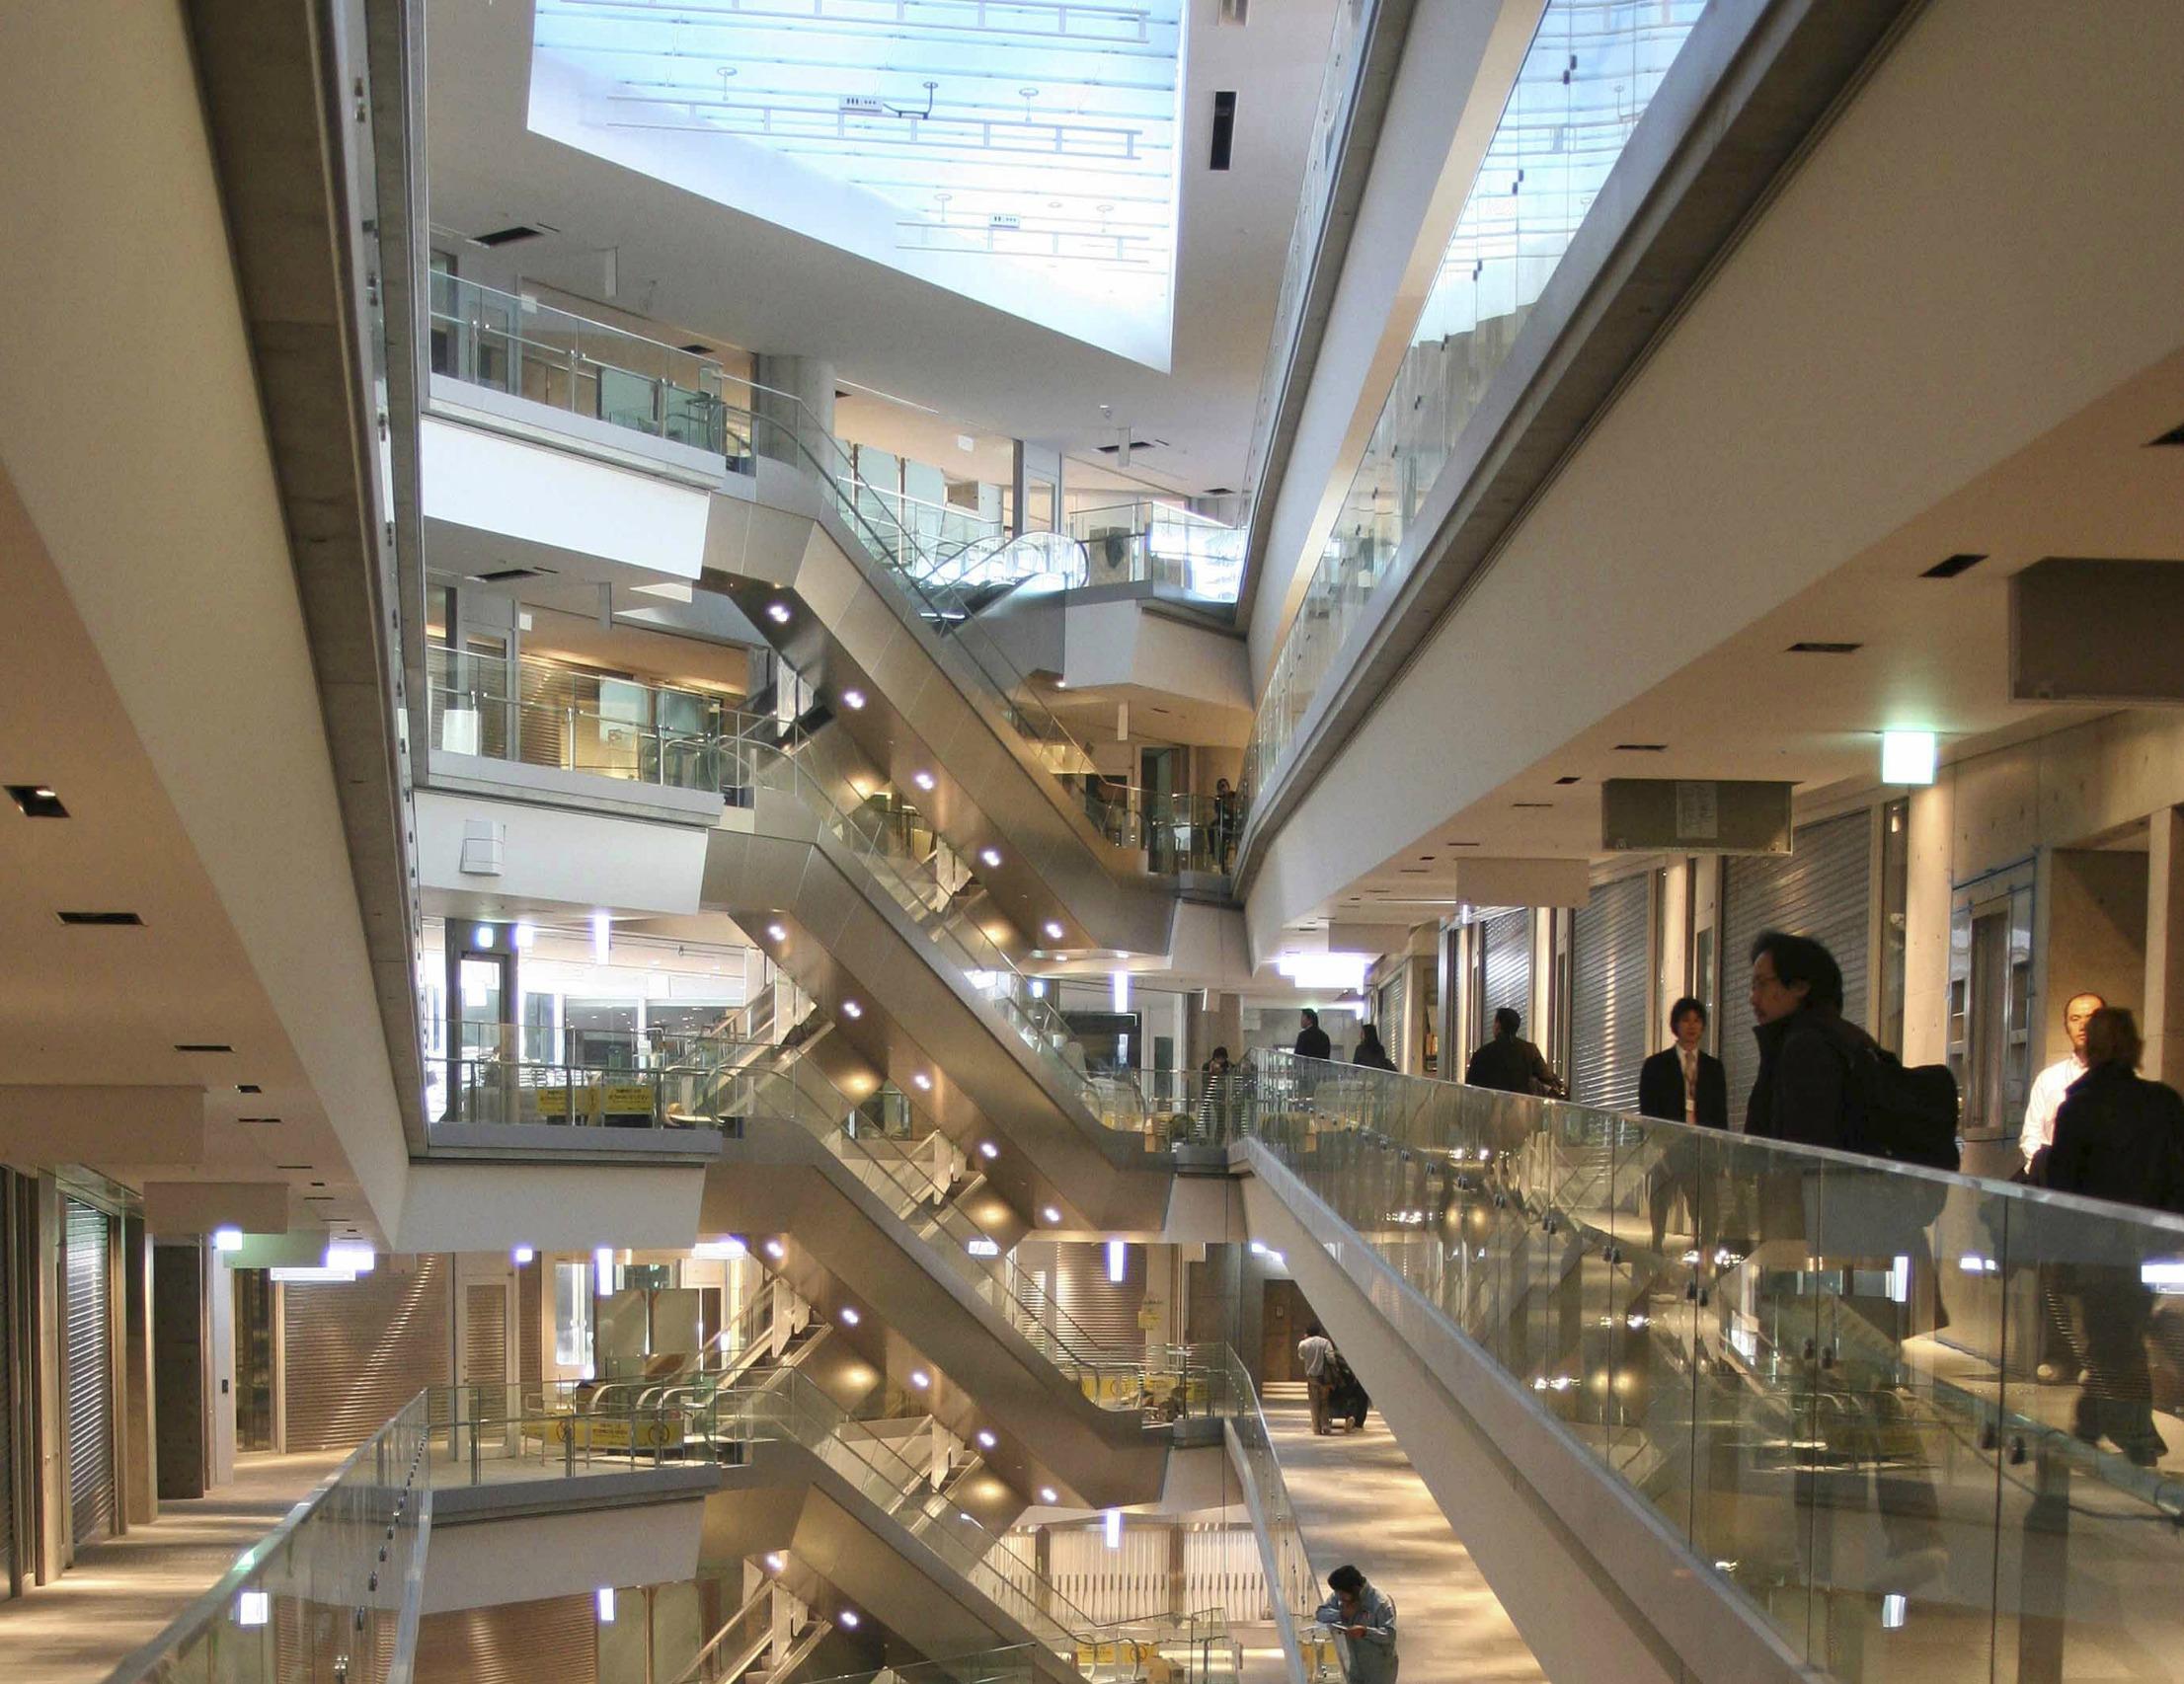 The Omotosando Hills shopping centre features a cascading waterfall of staircases